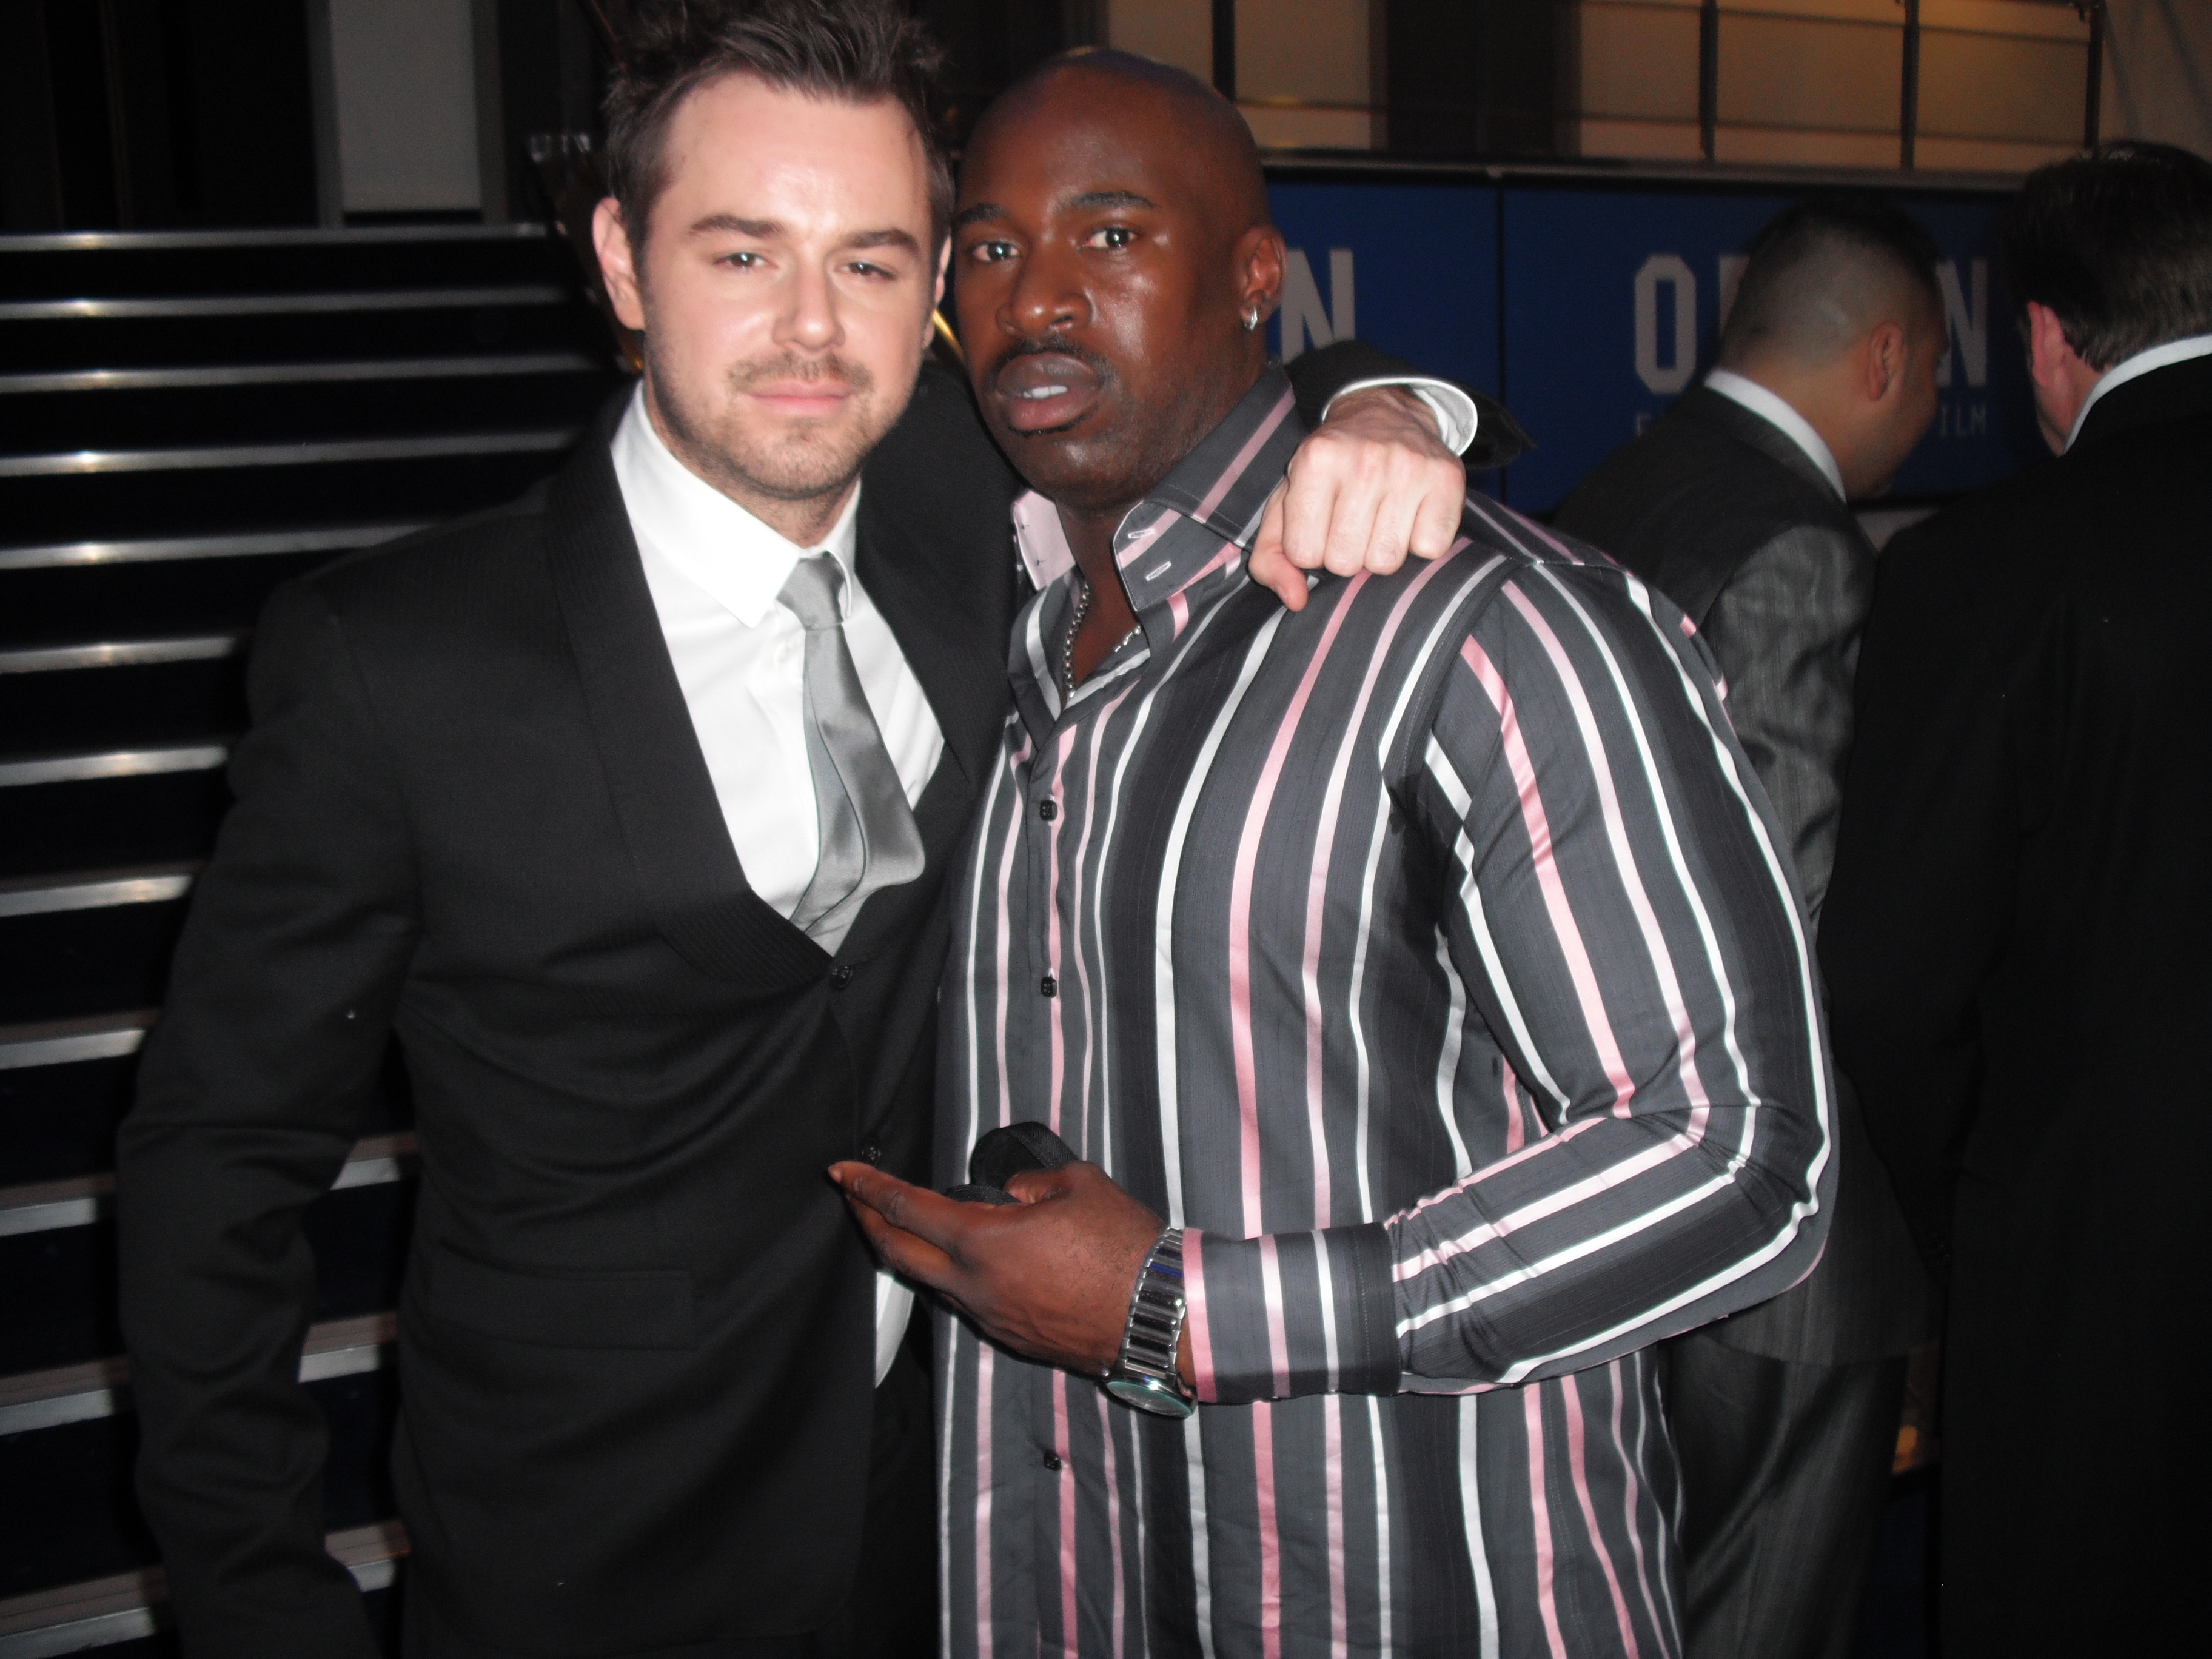 Me and Danny Dyer at DEAD MAN RUNNING Premiere.